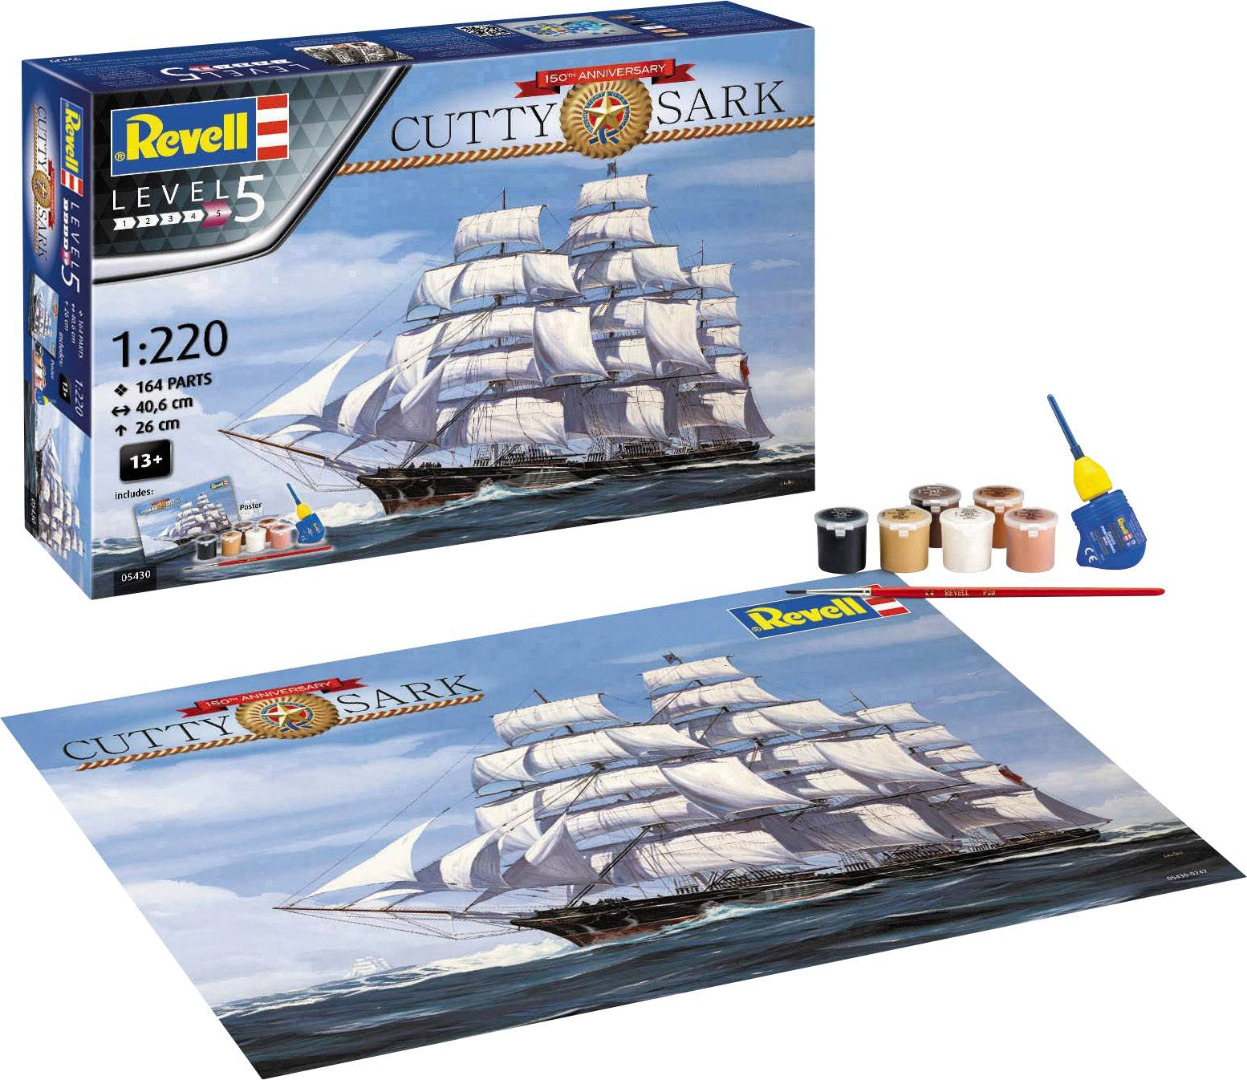 Revell Model Gift Set Cutty Sark 150th Anniversary Scale 1:220